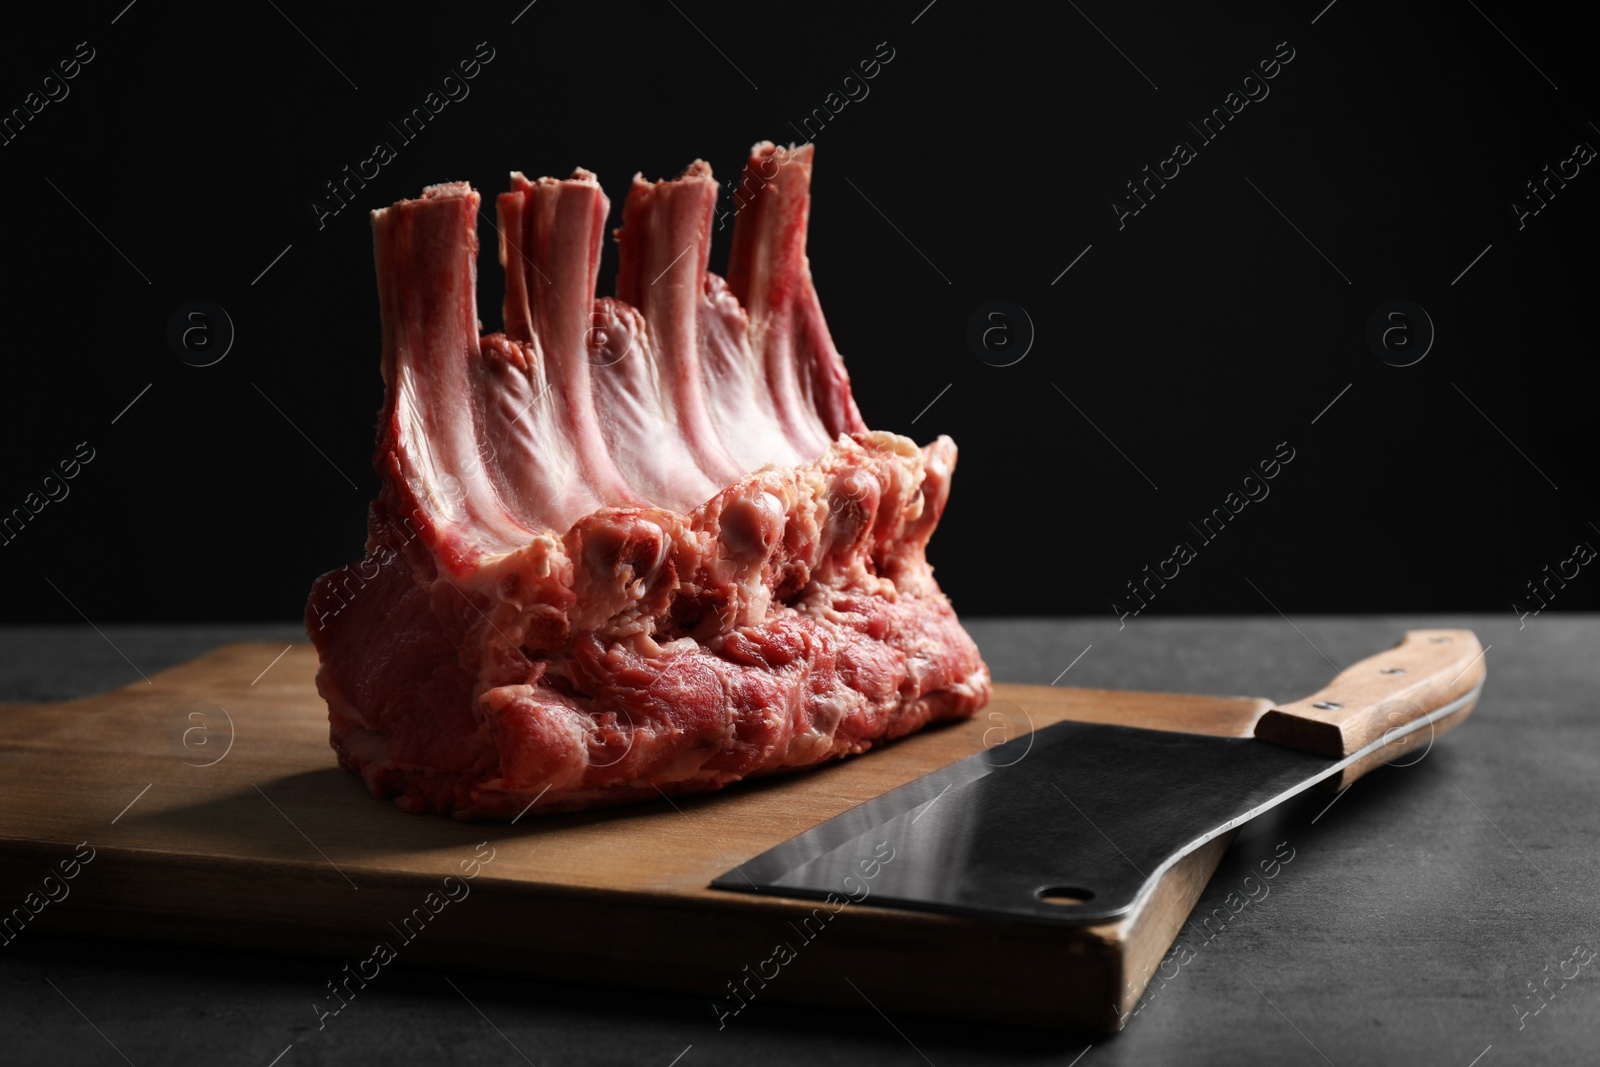 Photo of Raw ribs on grey table against black background